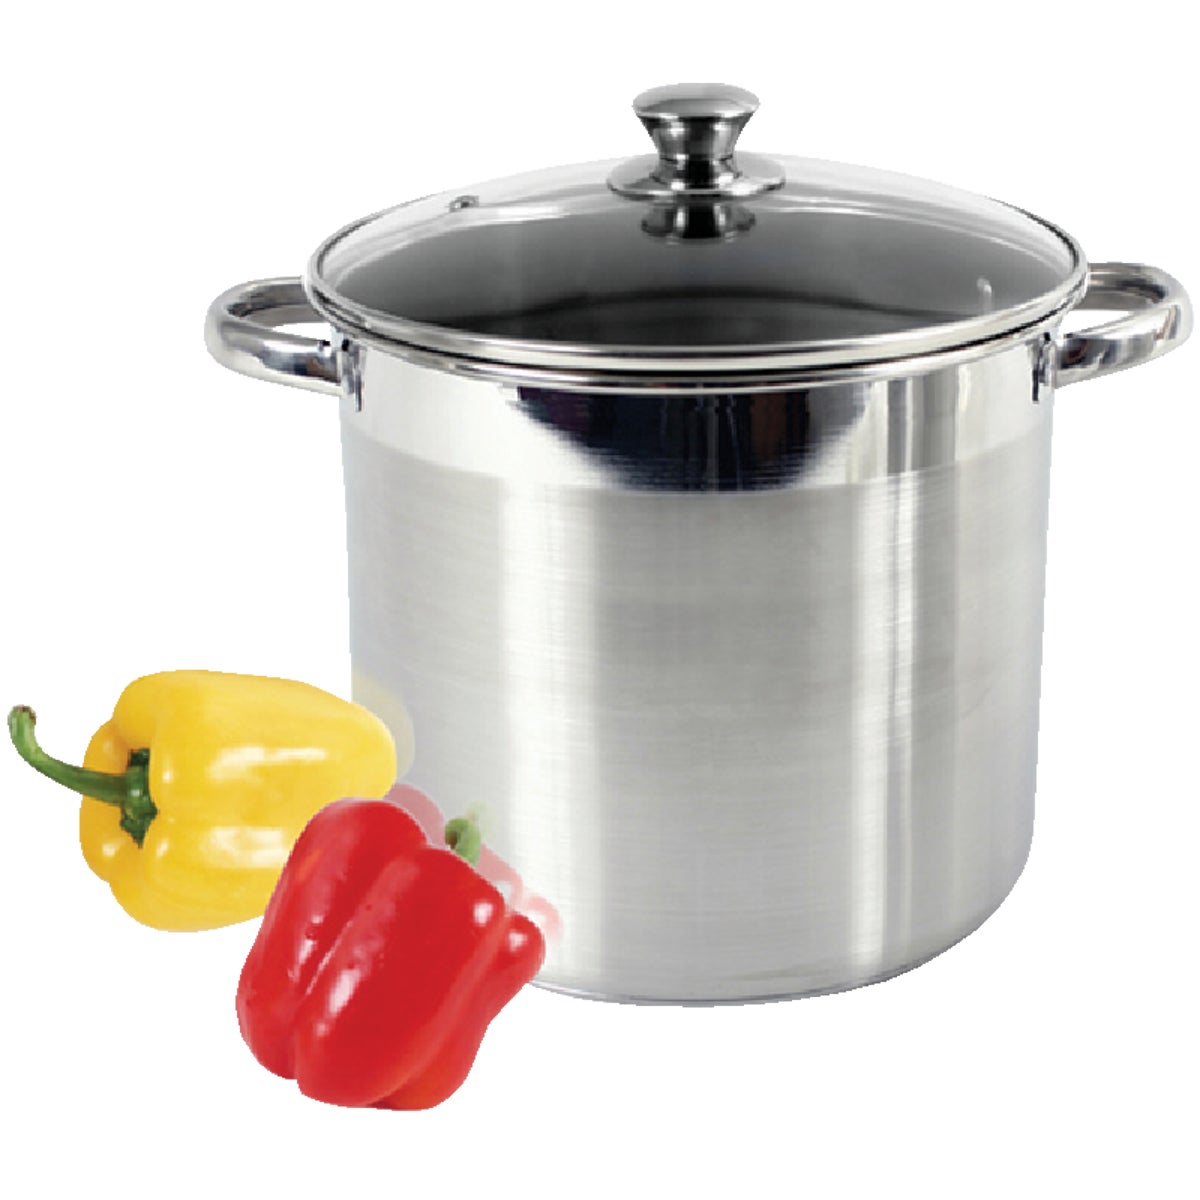 McSunley 8 Qt. Stainless Steel Stockpot